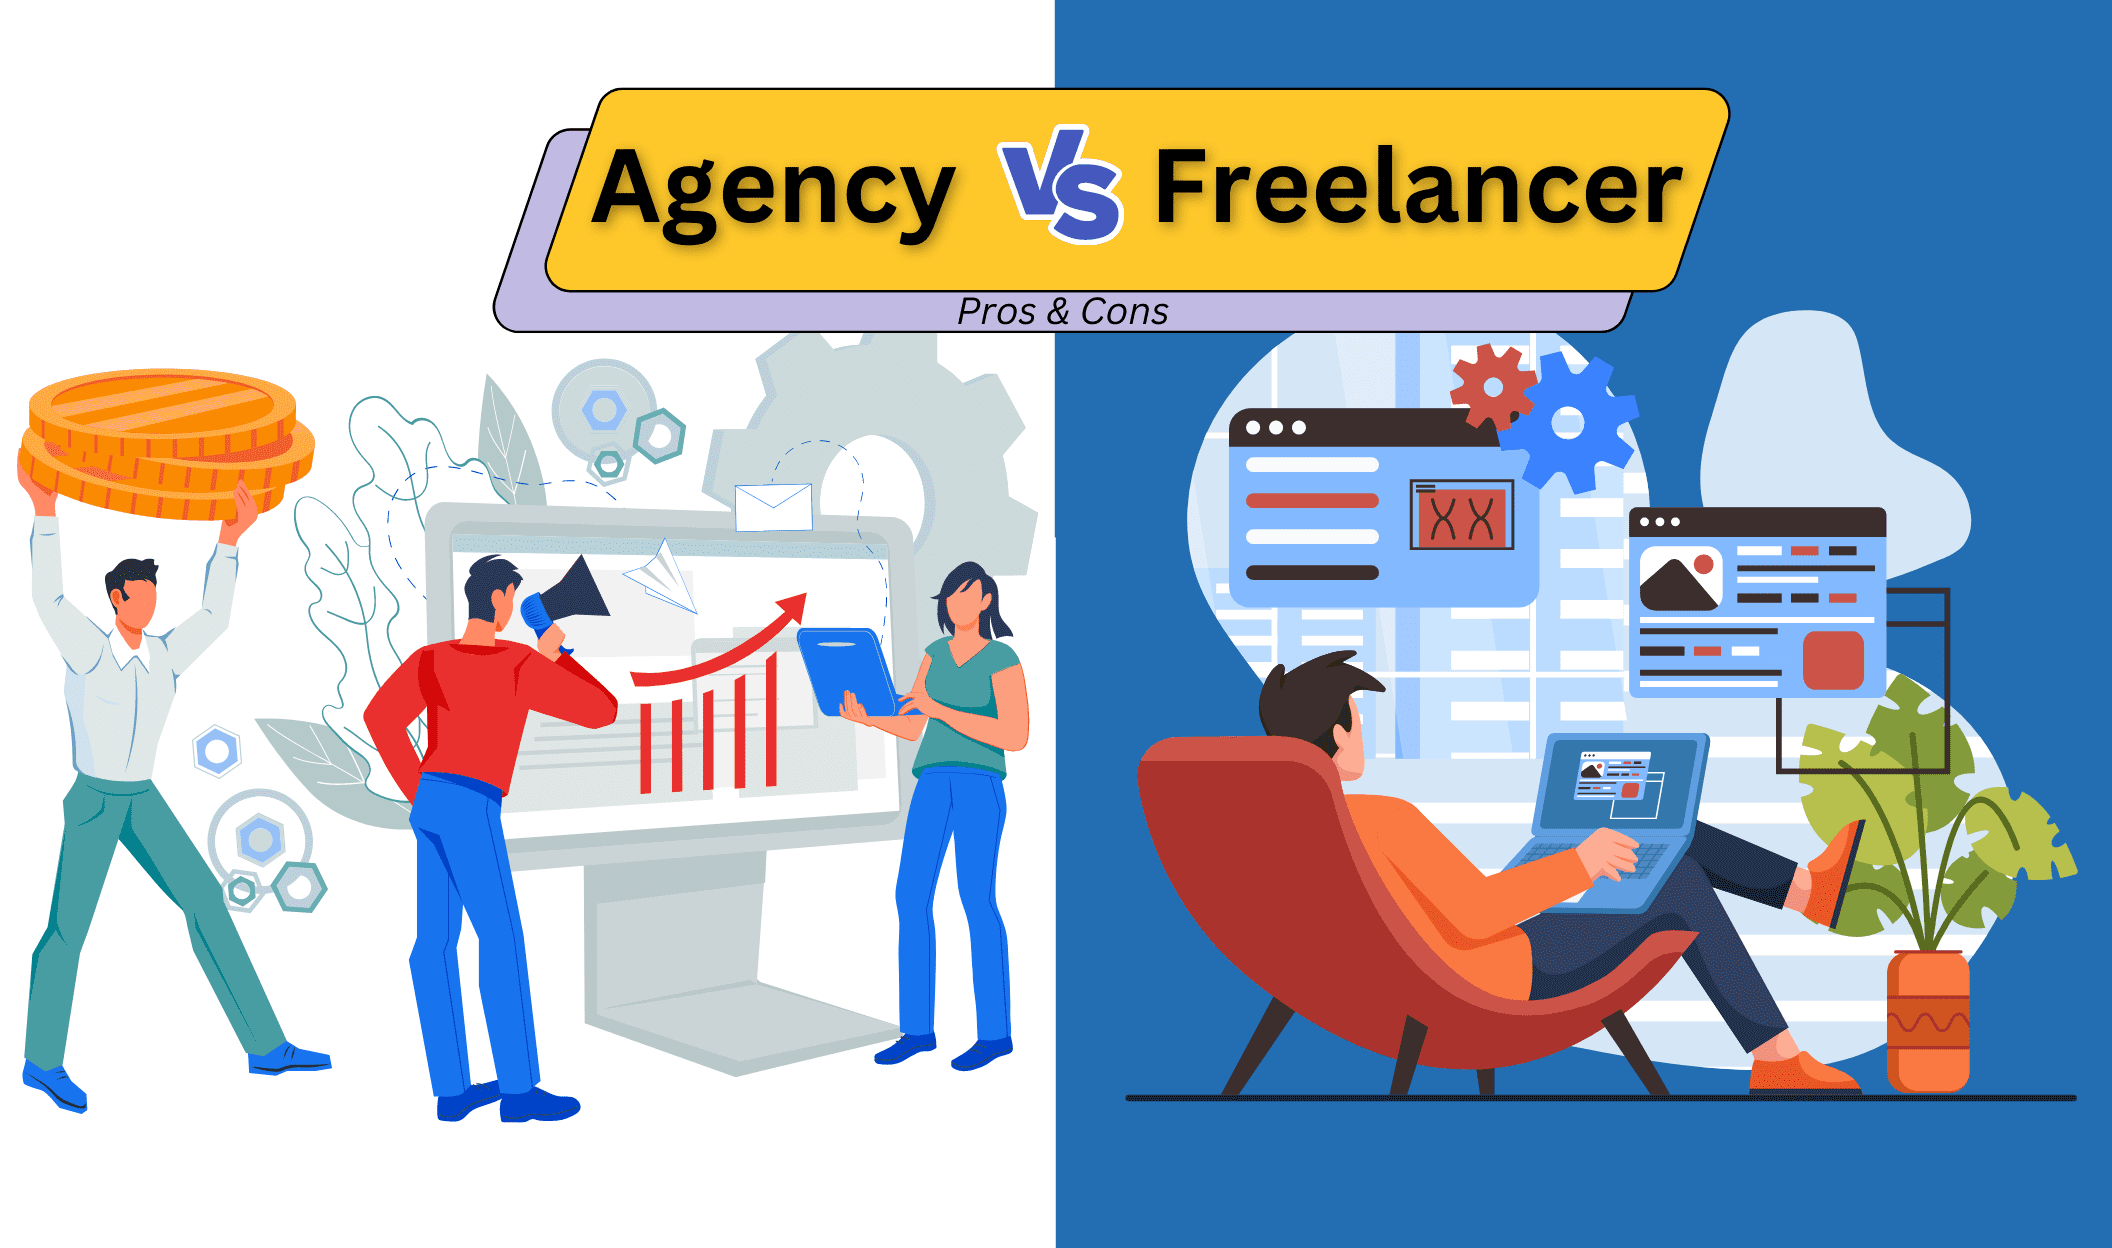 Agency Vs Freelance pro and cons